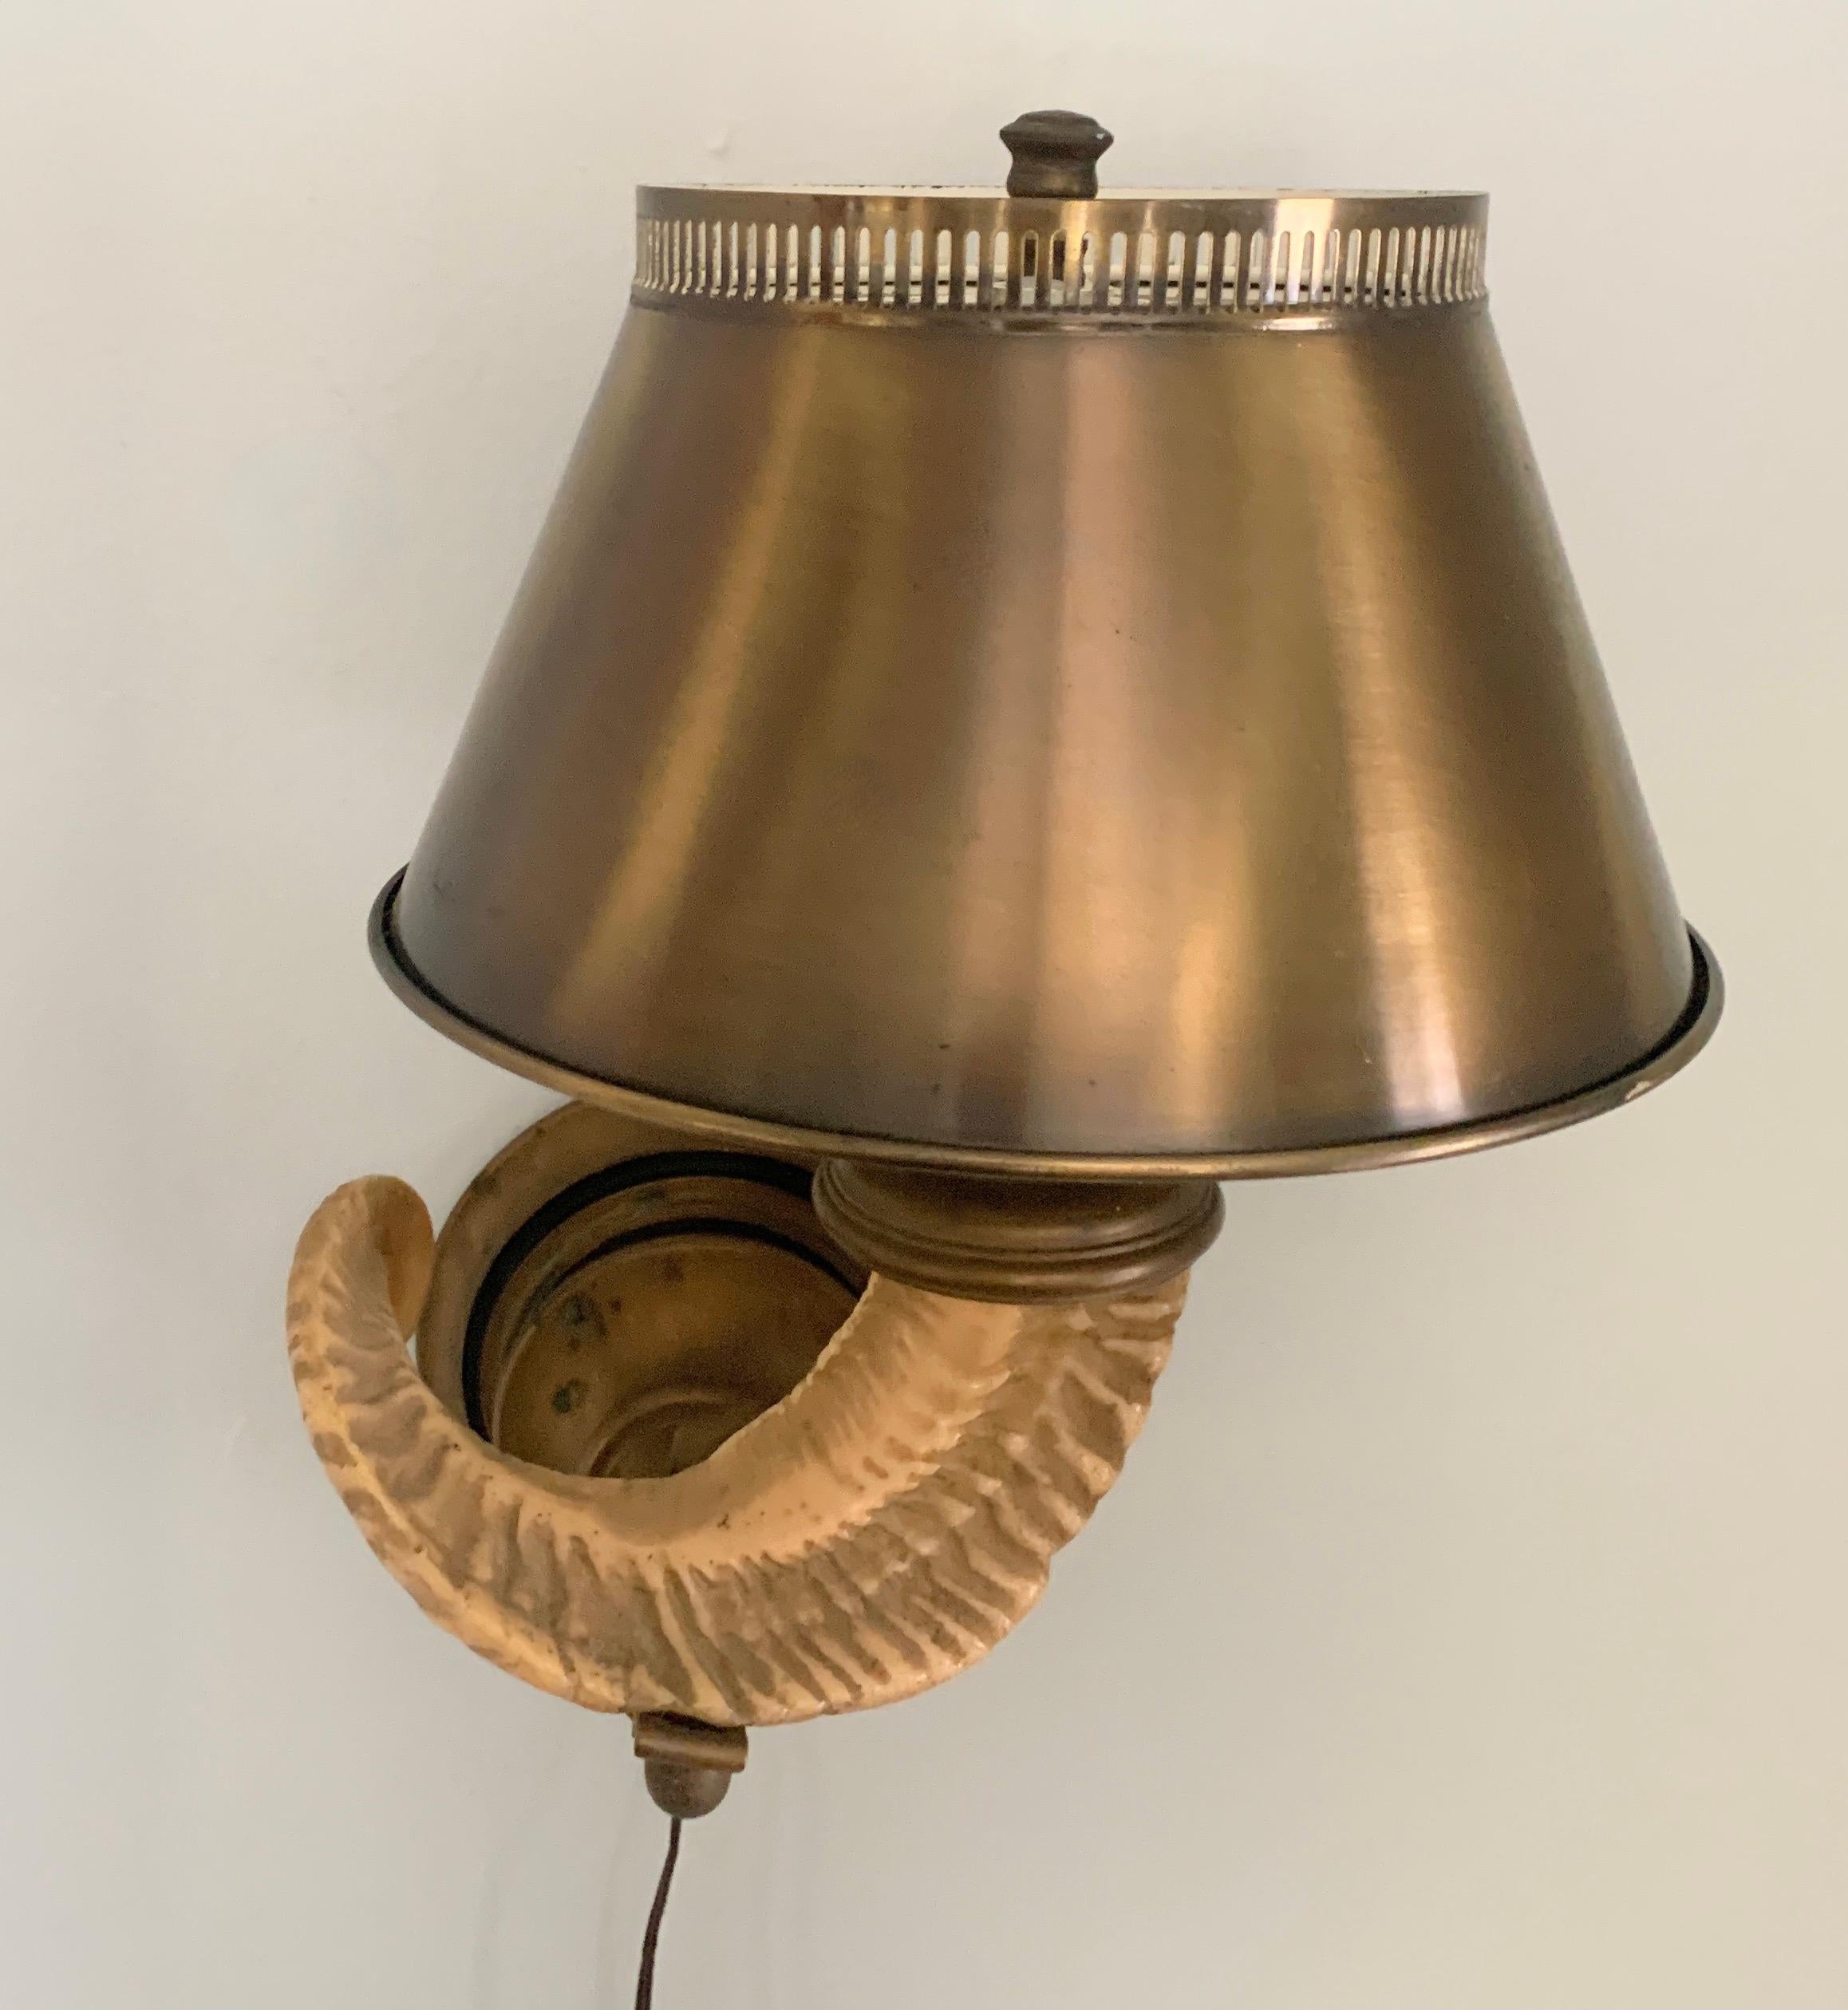 Wall Sconce by Mid Century lamp Aficionado, Chapman. The Sconce features an Antler or Horn with metal shade and finial for light diffusion. The metal is patinated and in good condition. A compliment to any interior and especially those with a rustic